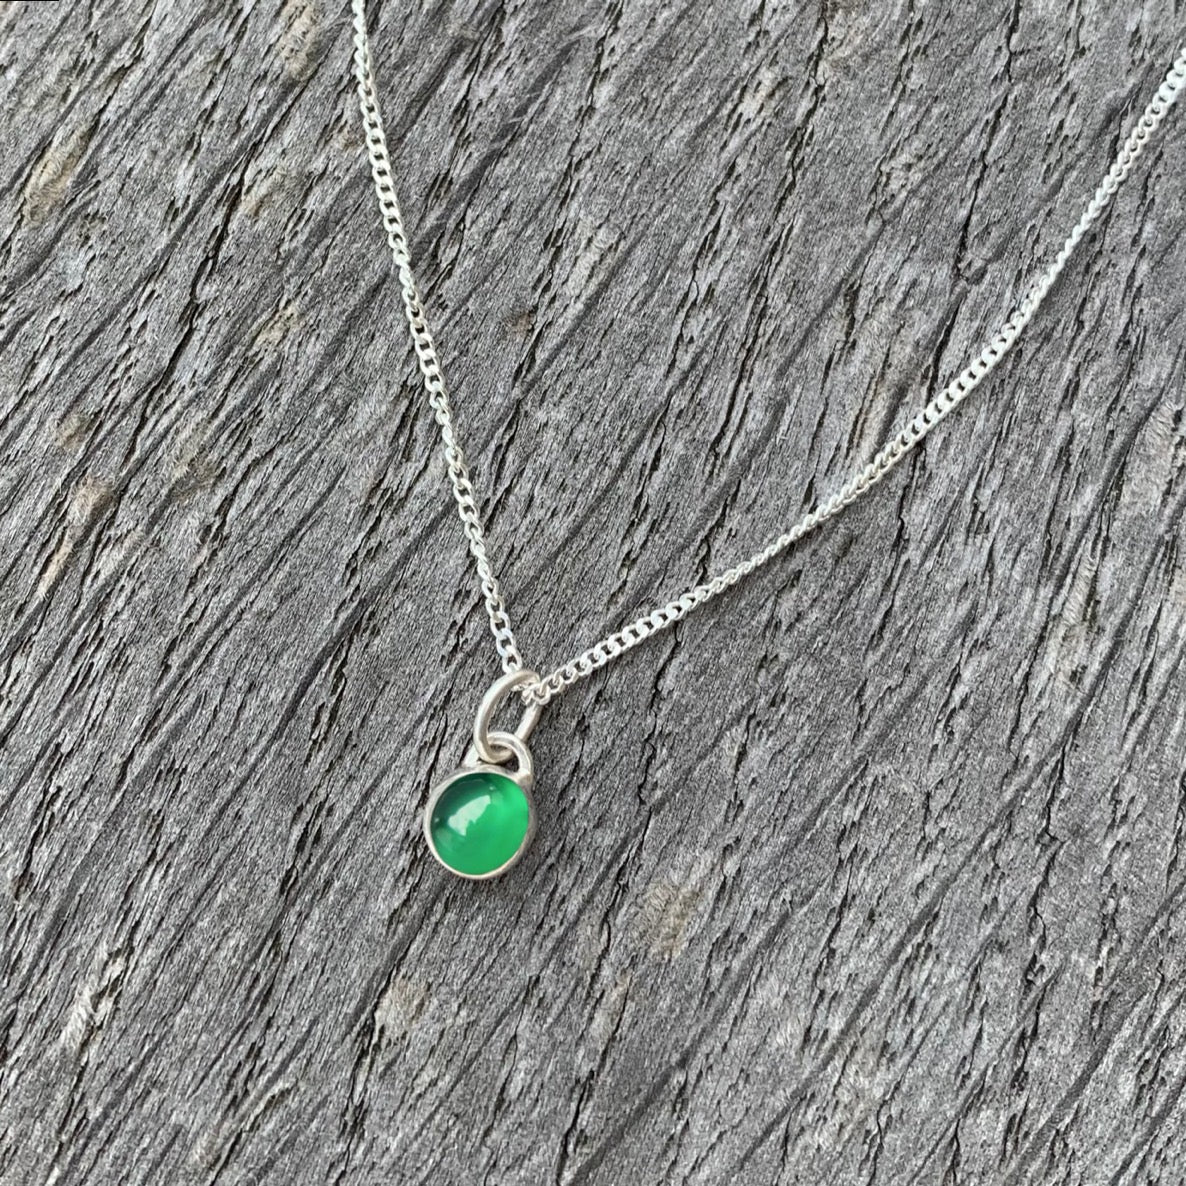 A green onyx stone set in silver on a sterling silver chain.